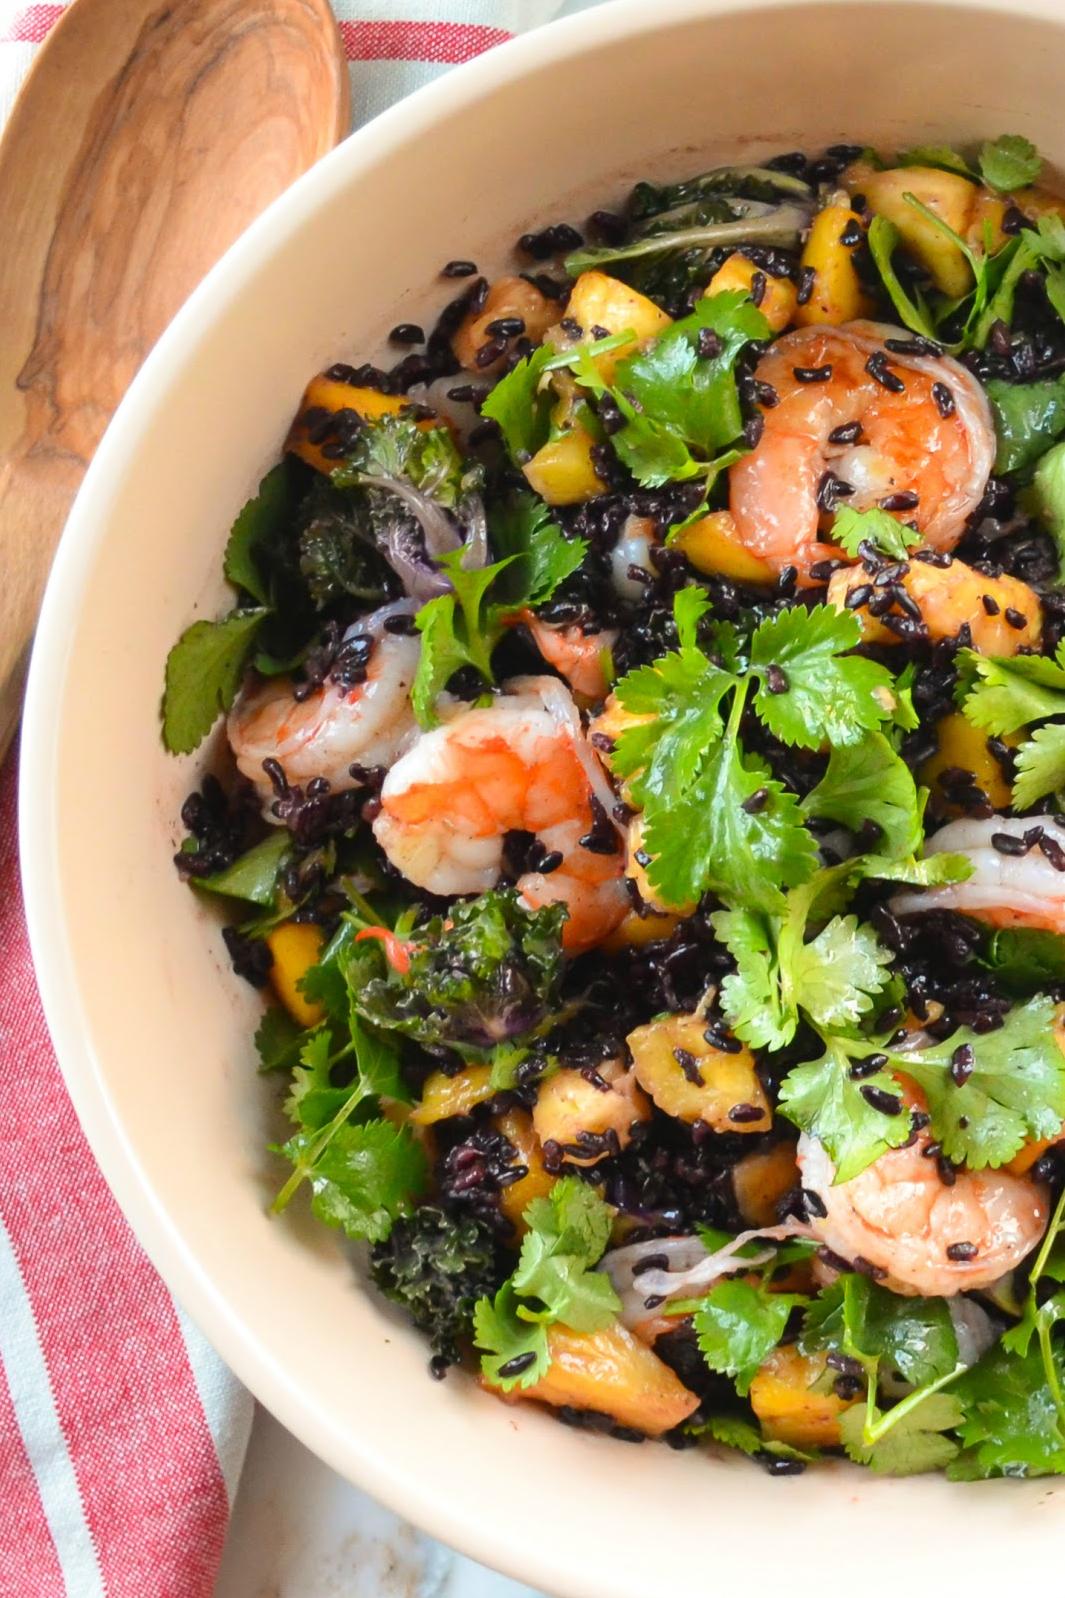  Say goodbye to boring salads and hello to this colorful and flavorful dish!